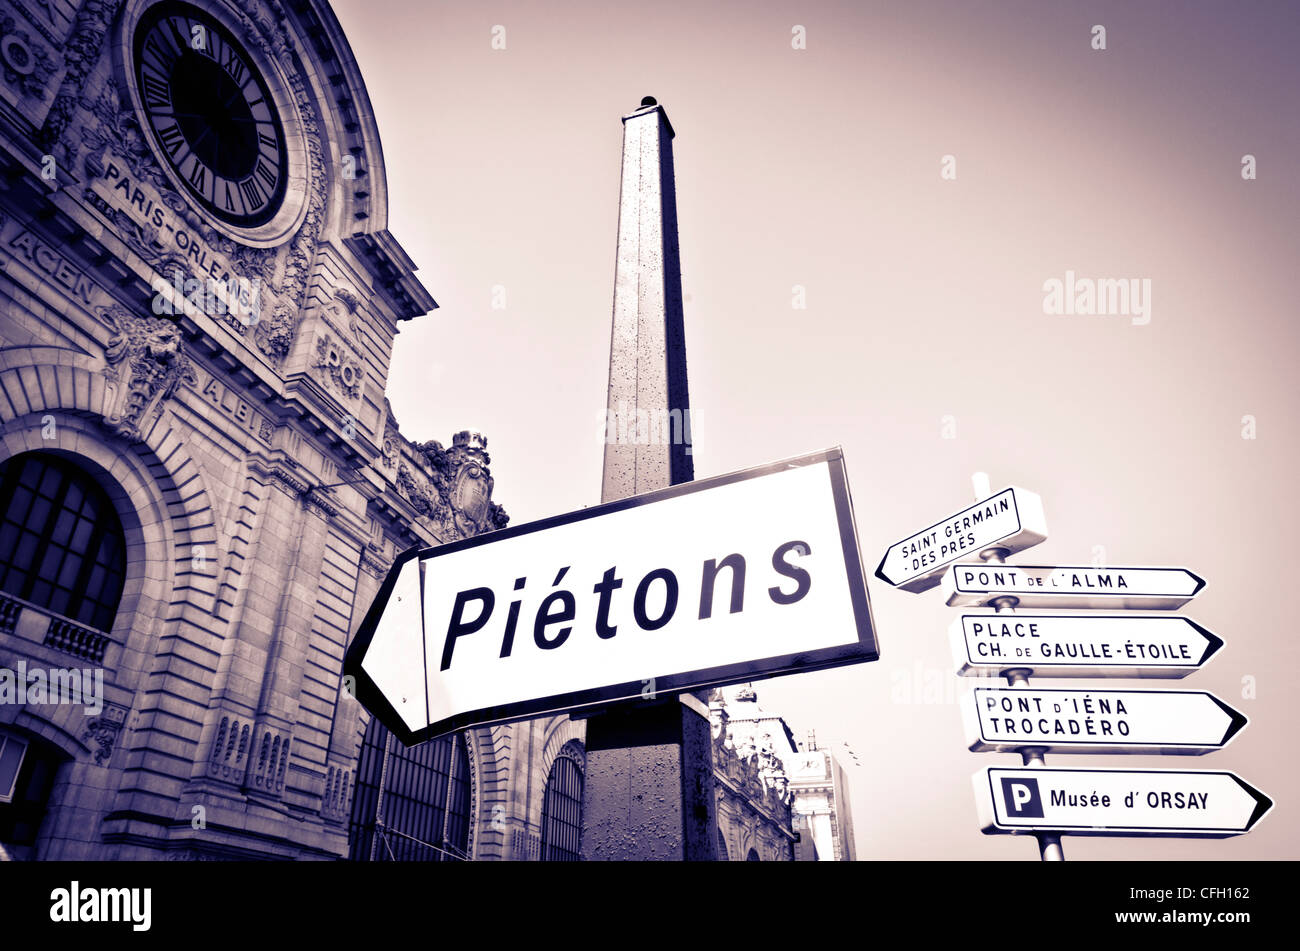 Street signs in front of the Paris-Orleans building, Paris, France Stock Photo